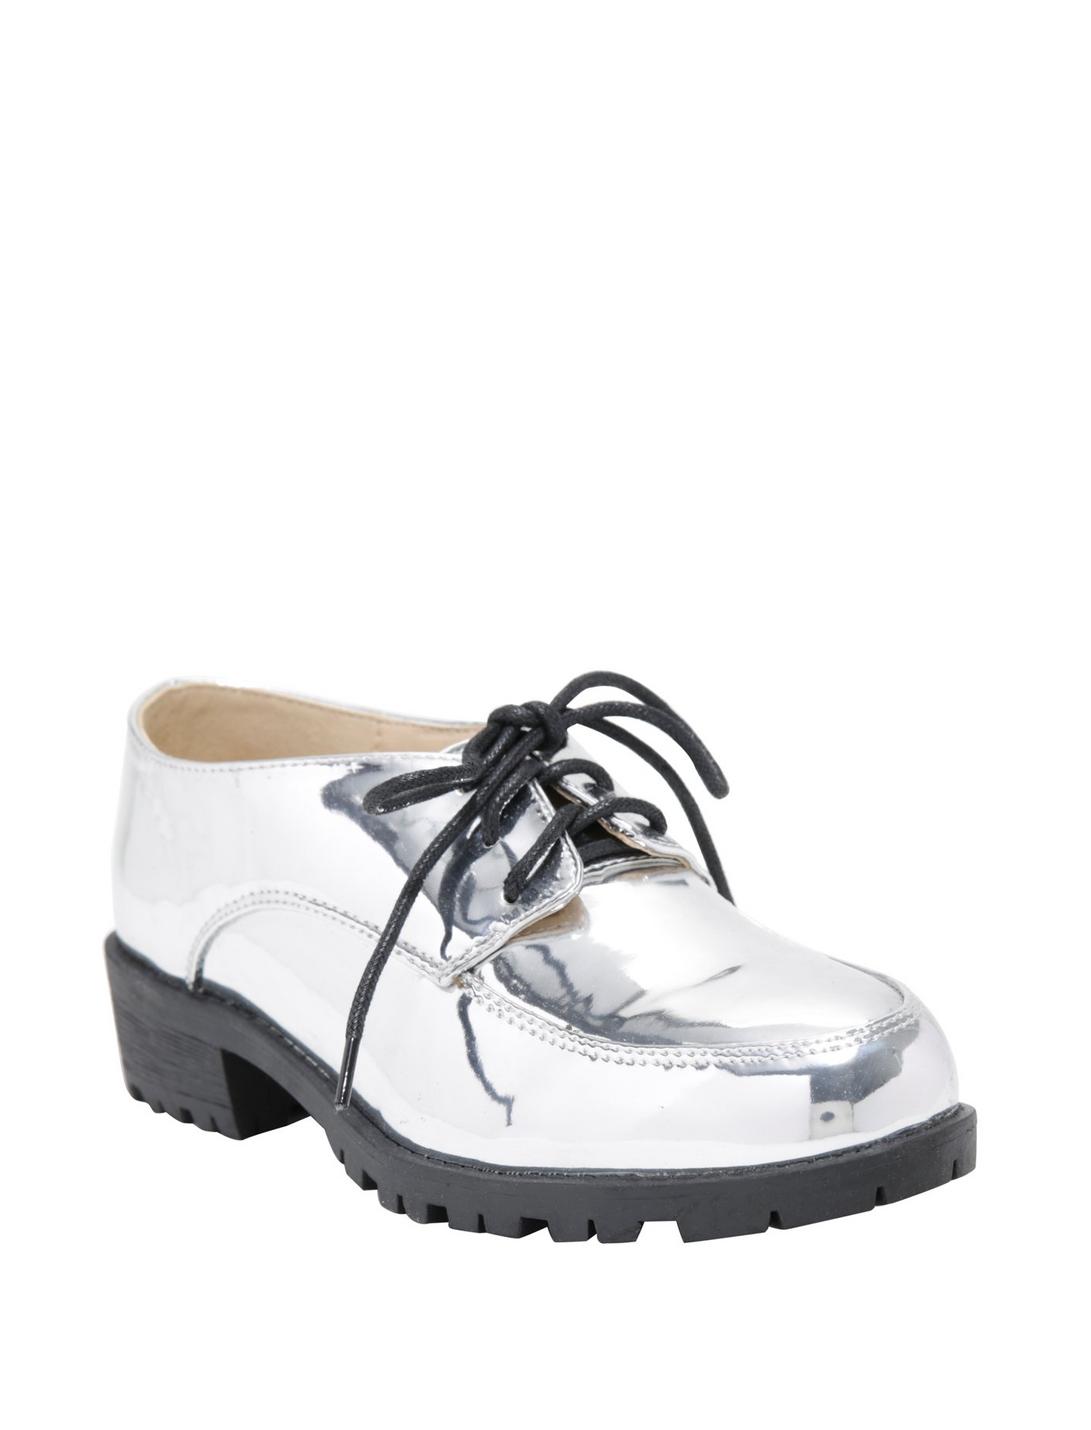 Silver Lace Up Loafer, SILVER METALLIC, hi-res